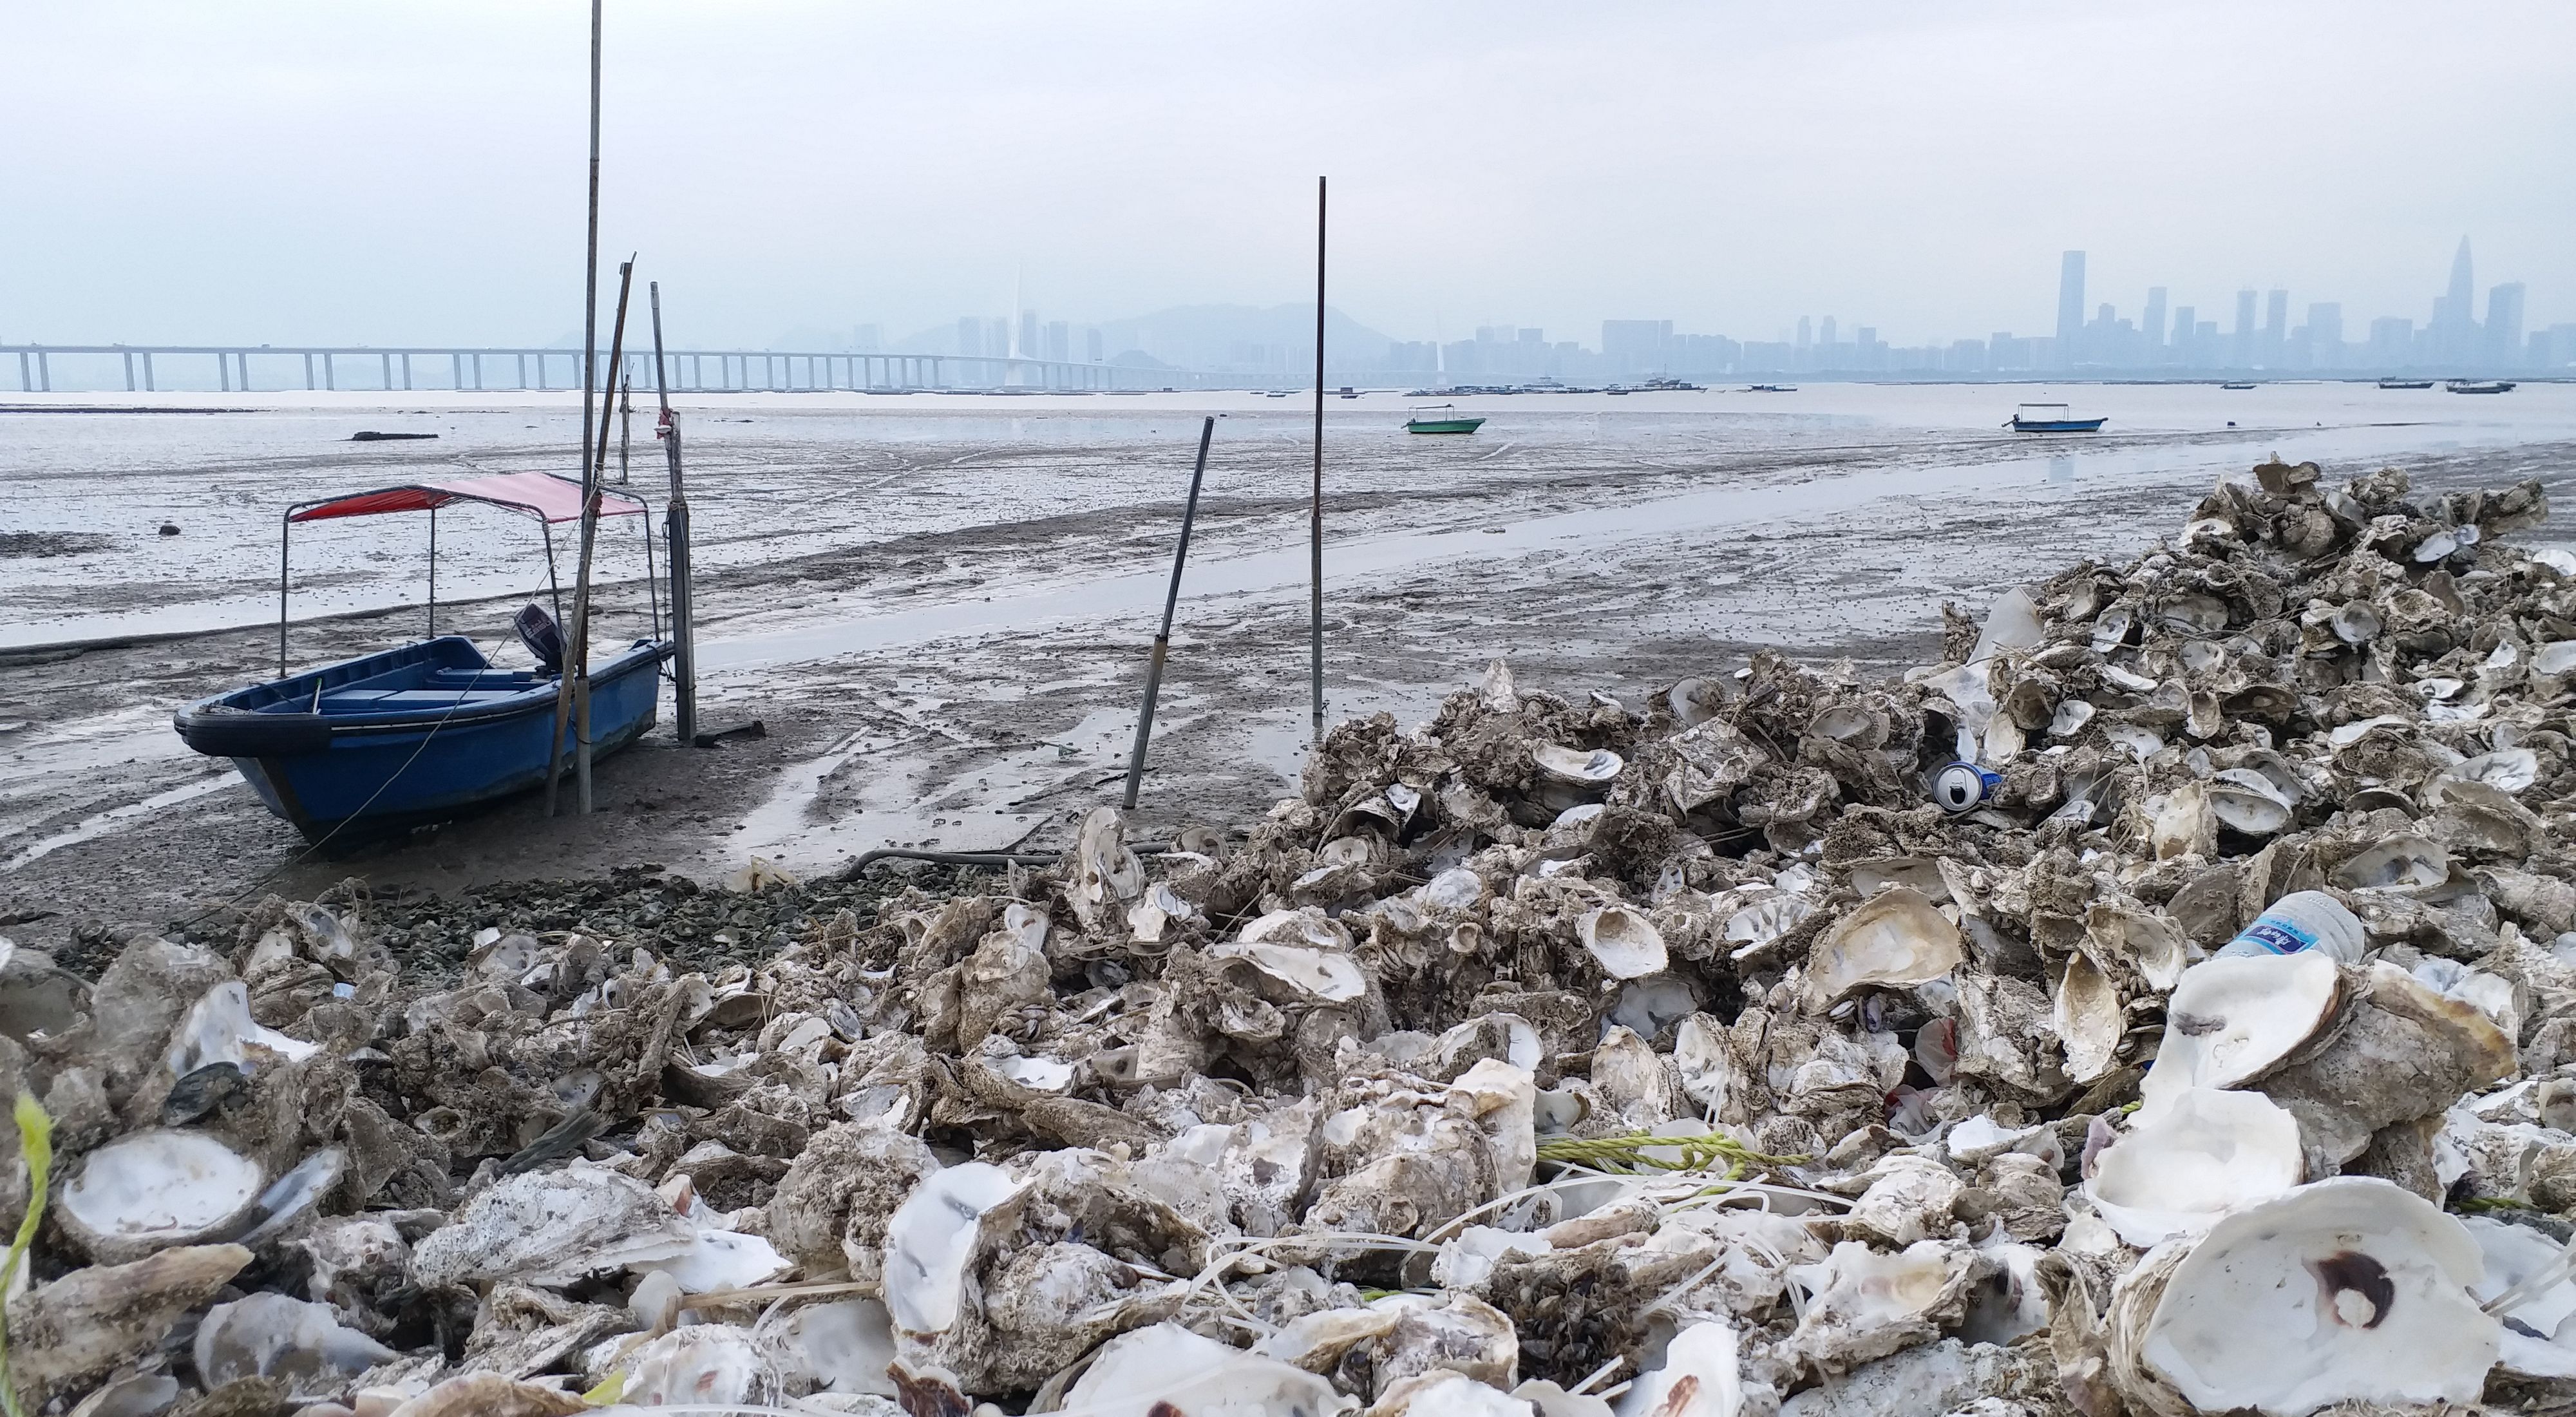 Oyster shells are discarded along the shoreline near Deep Bay.